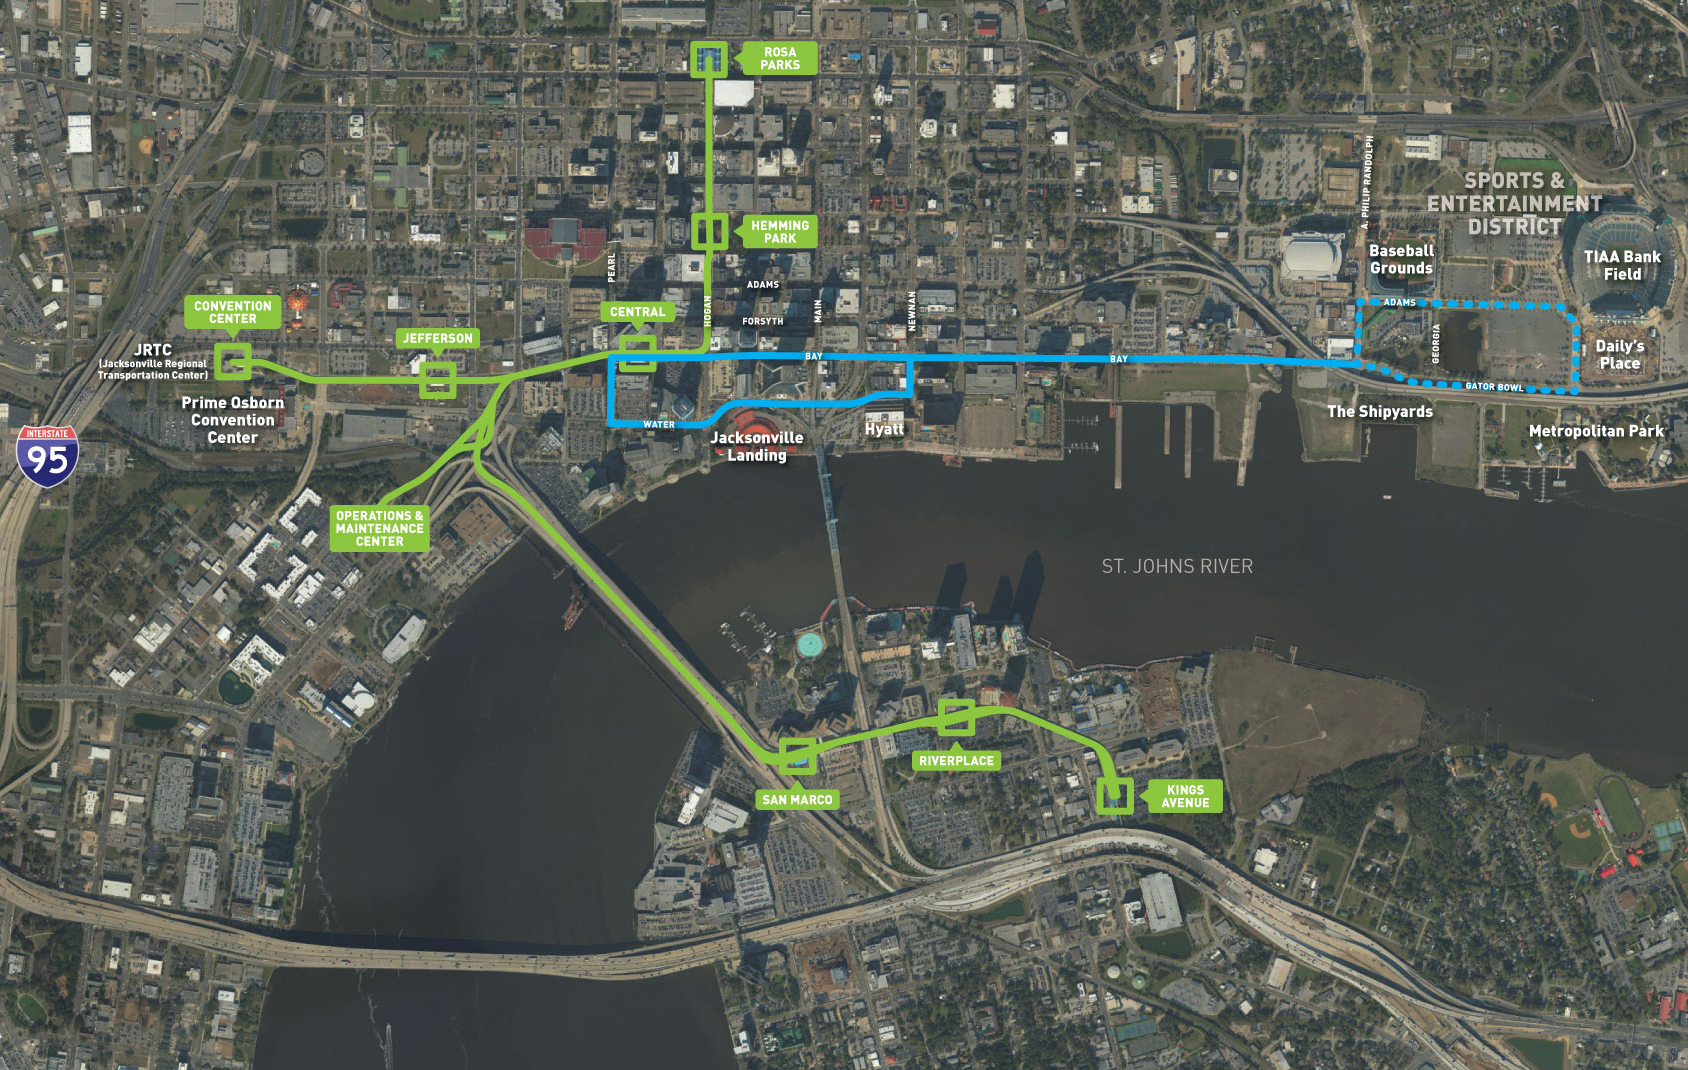 The second phase of the Skyway modernization project would convert the existing Skyway rail into an elevated track for autonomous vehicles.